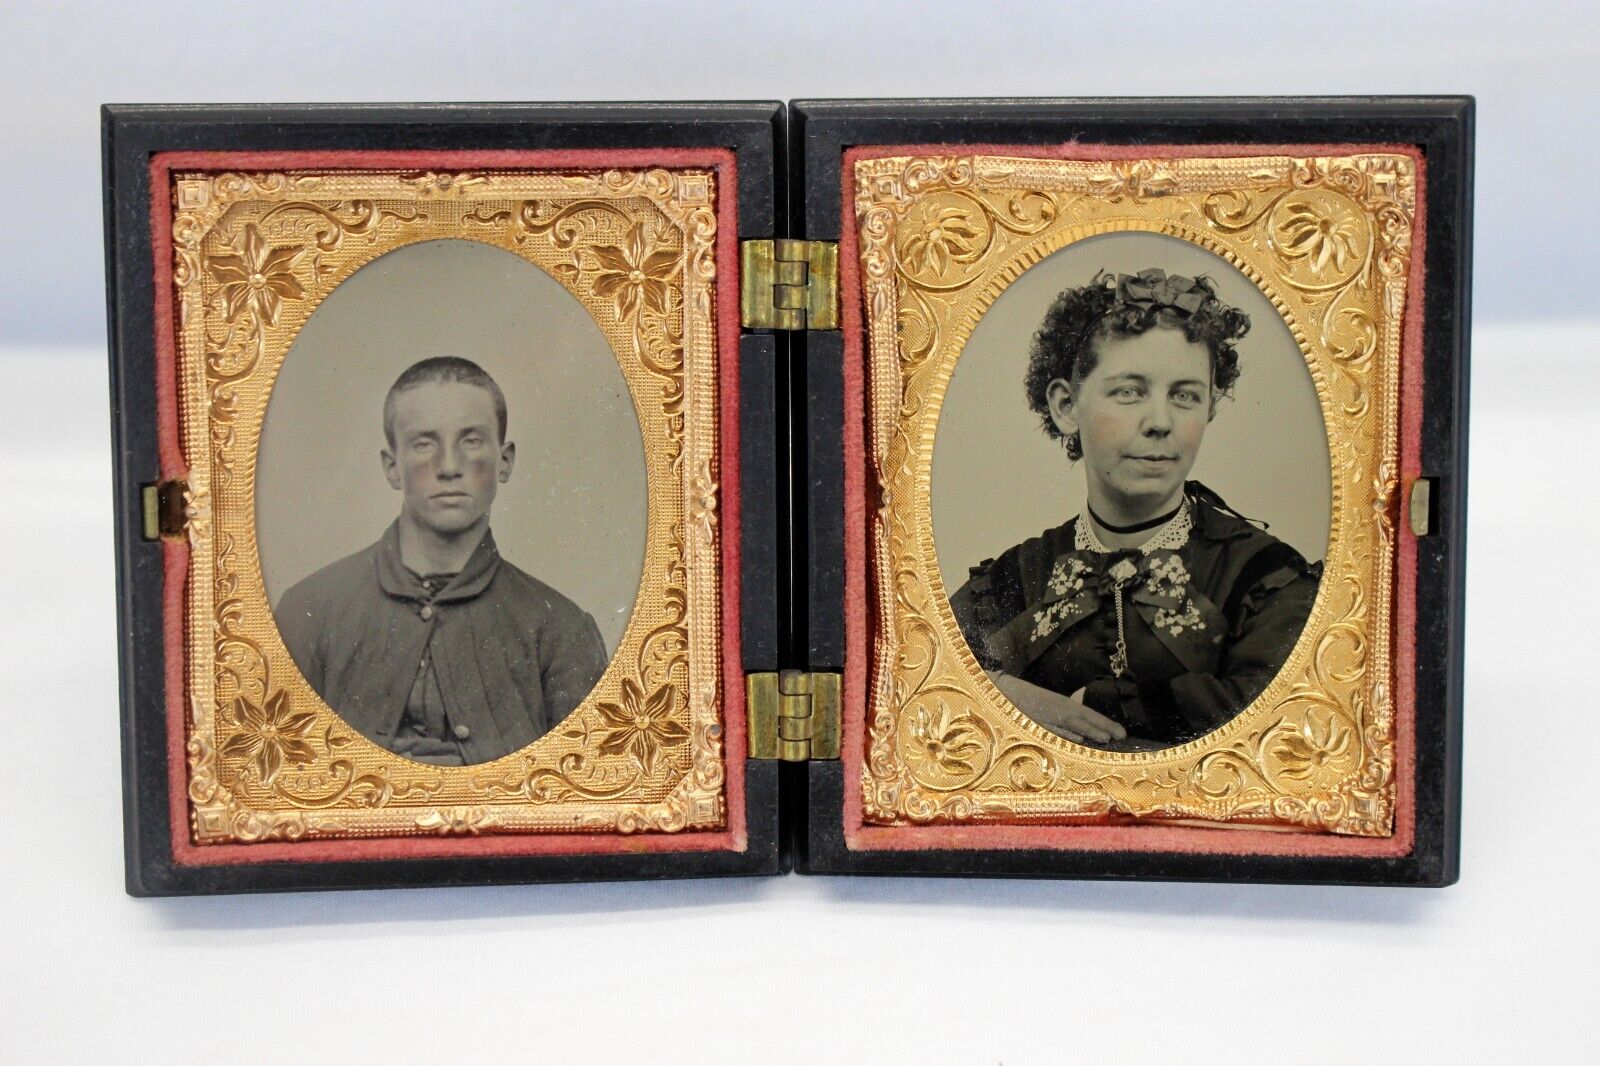 Dual 1/9 Plate Thermoplastic CIVIL WAR SOLDIER & WIFE Tintype Case GEOMETRIC